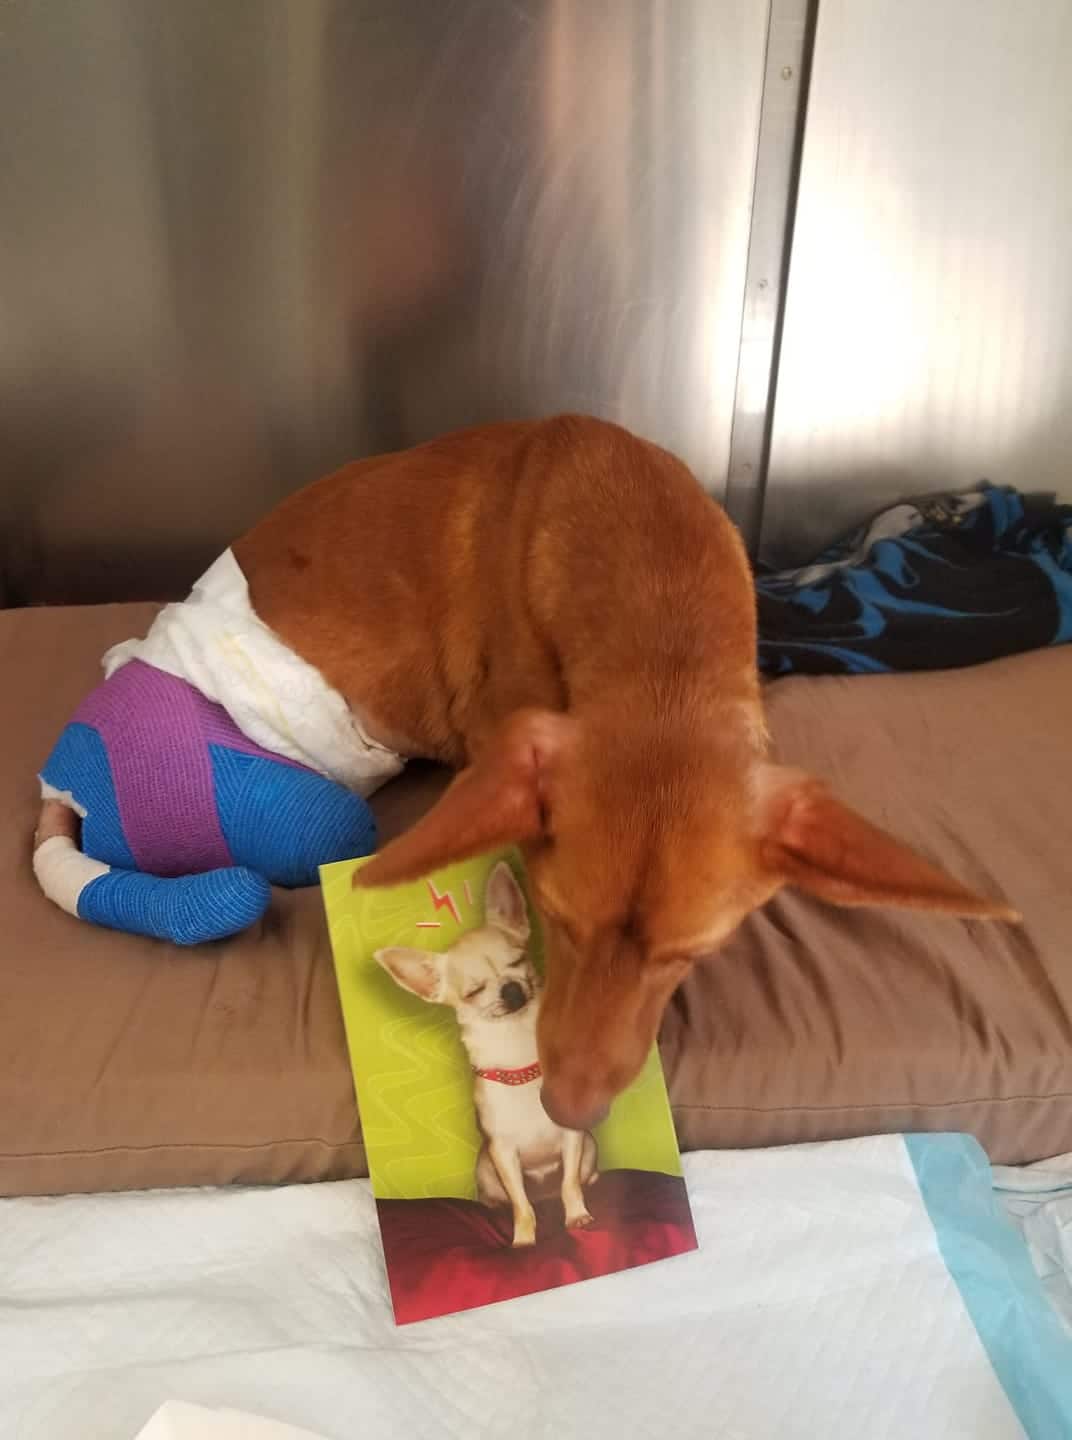 It’s hard to believe such cruelty. Mother and daughter arrested after dog found with sawn-off legs